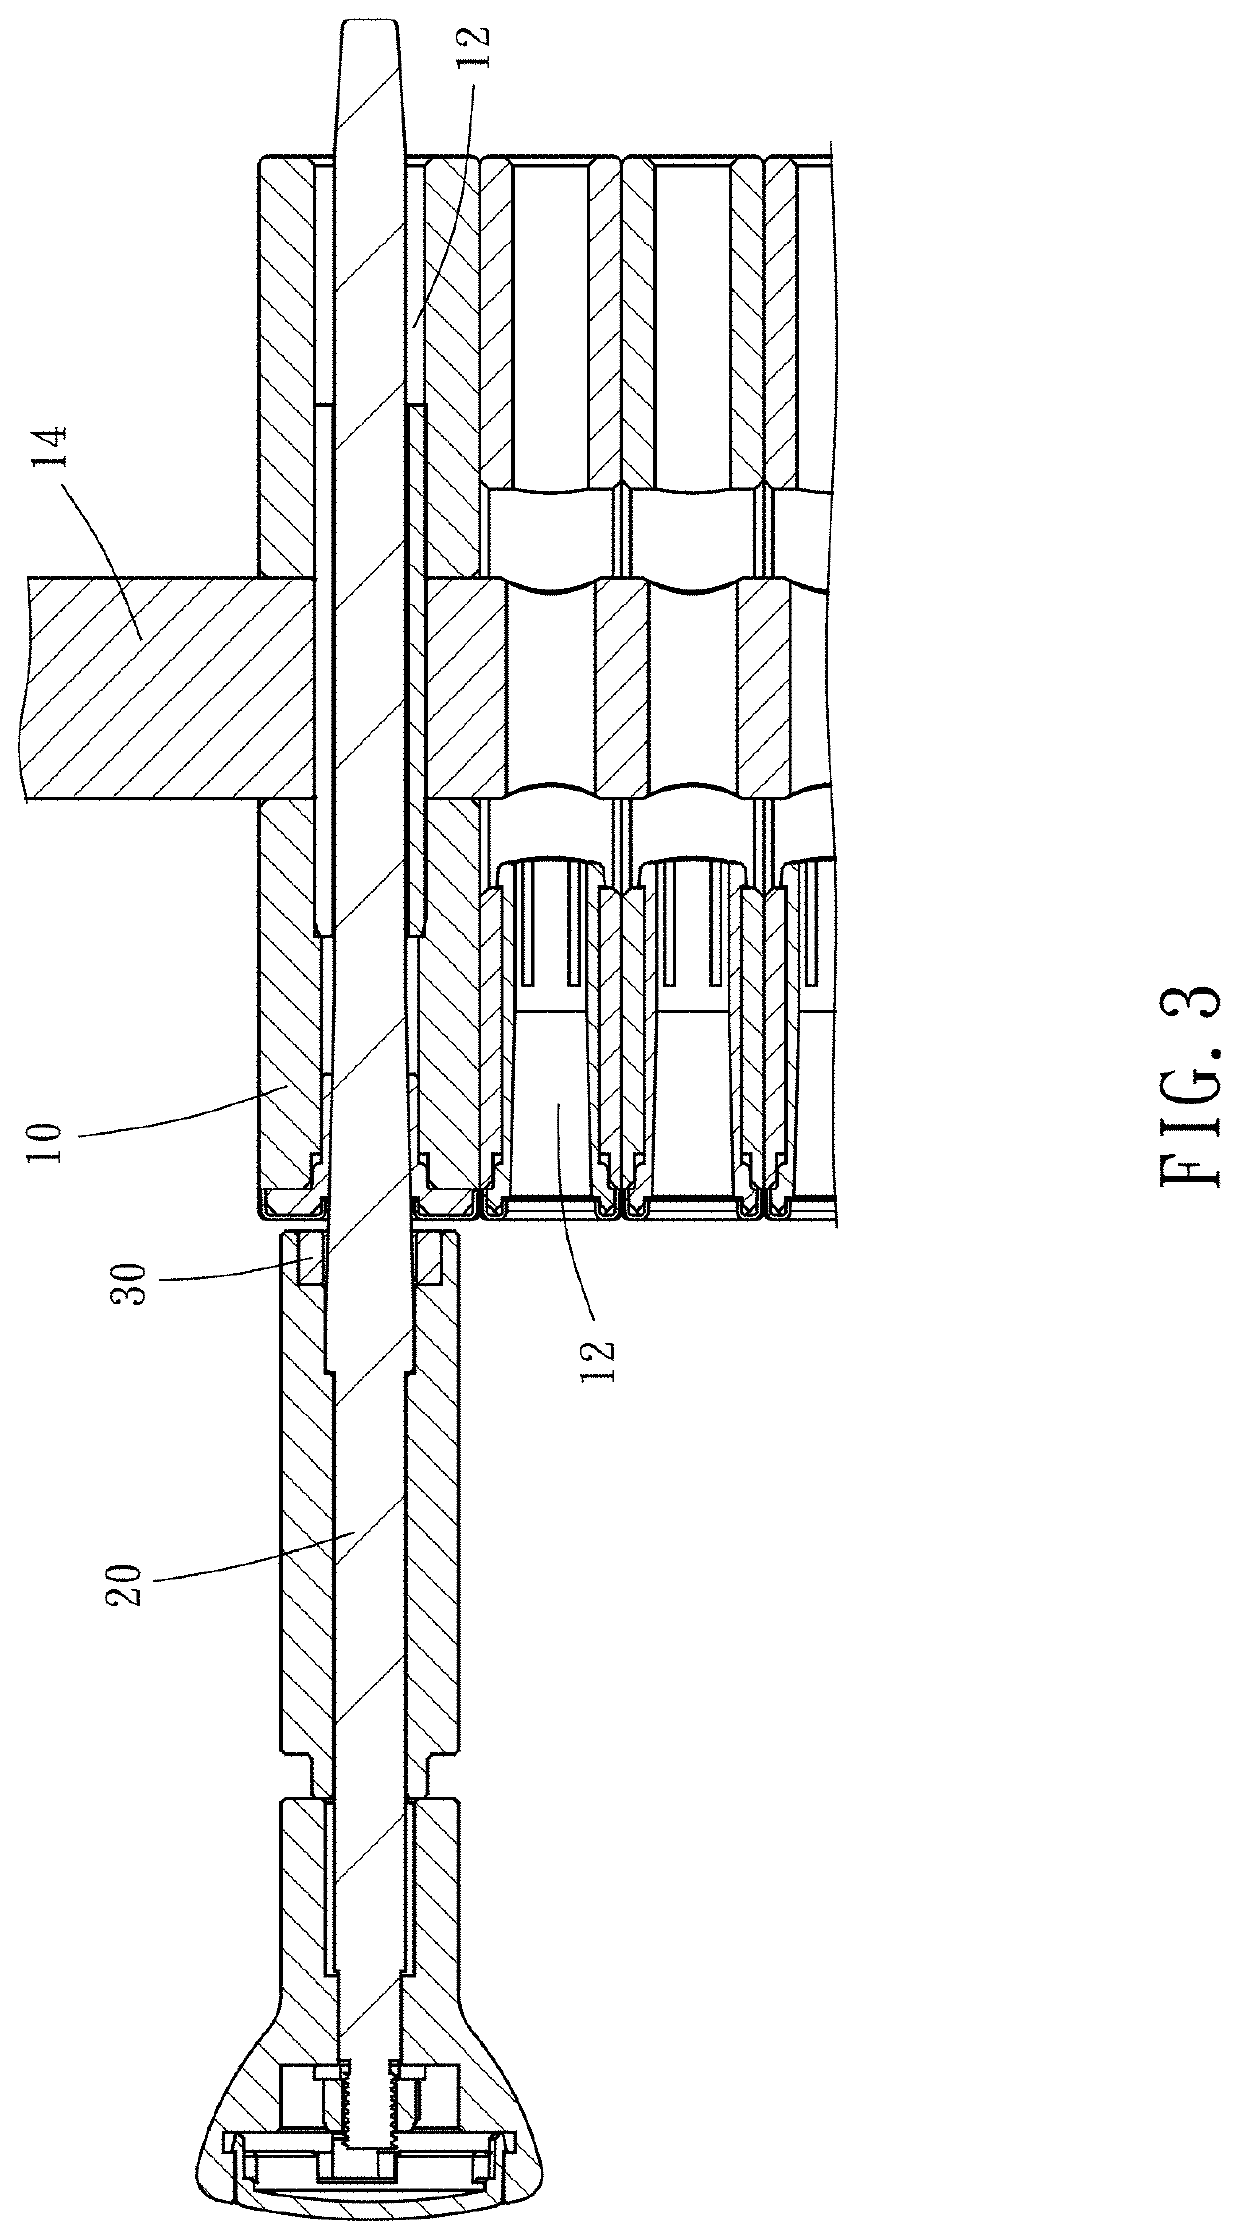 Weight plate gap adjustment device for weight training equipment